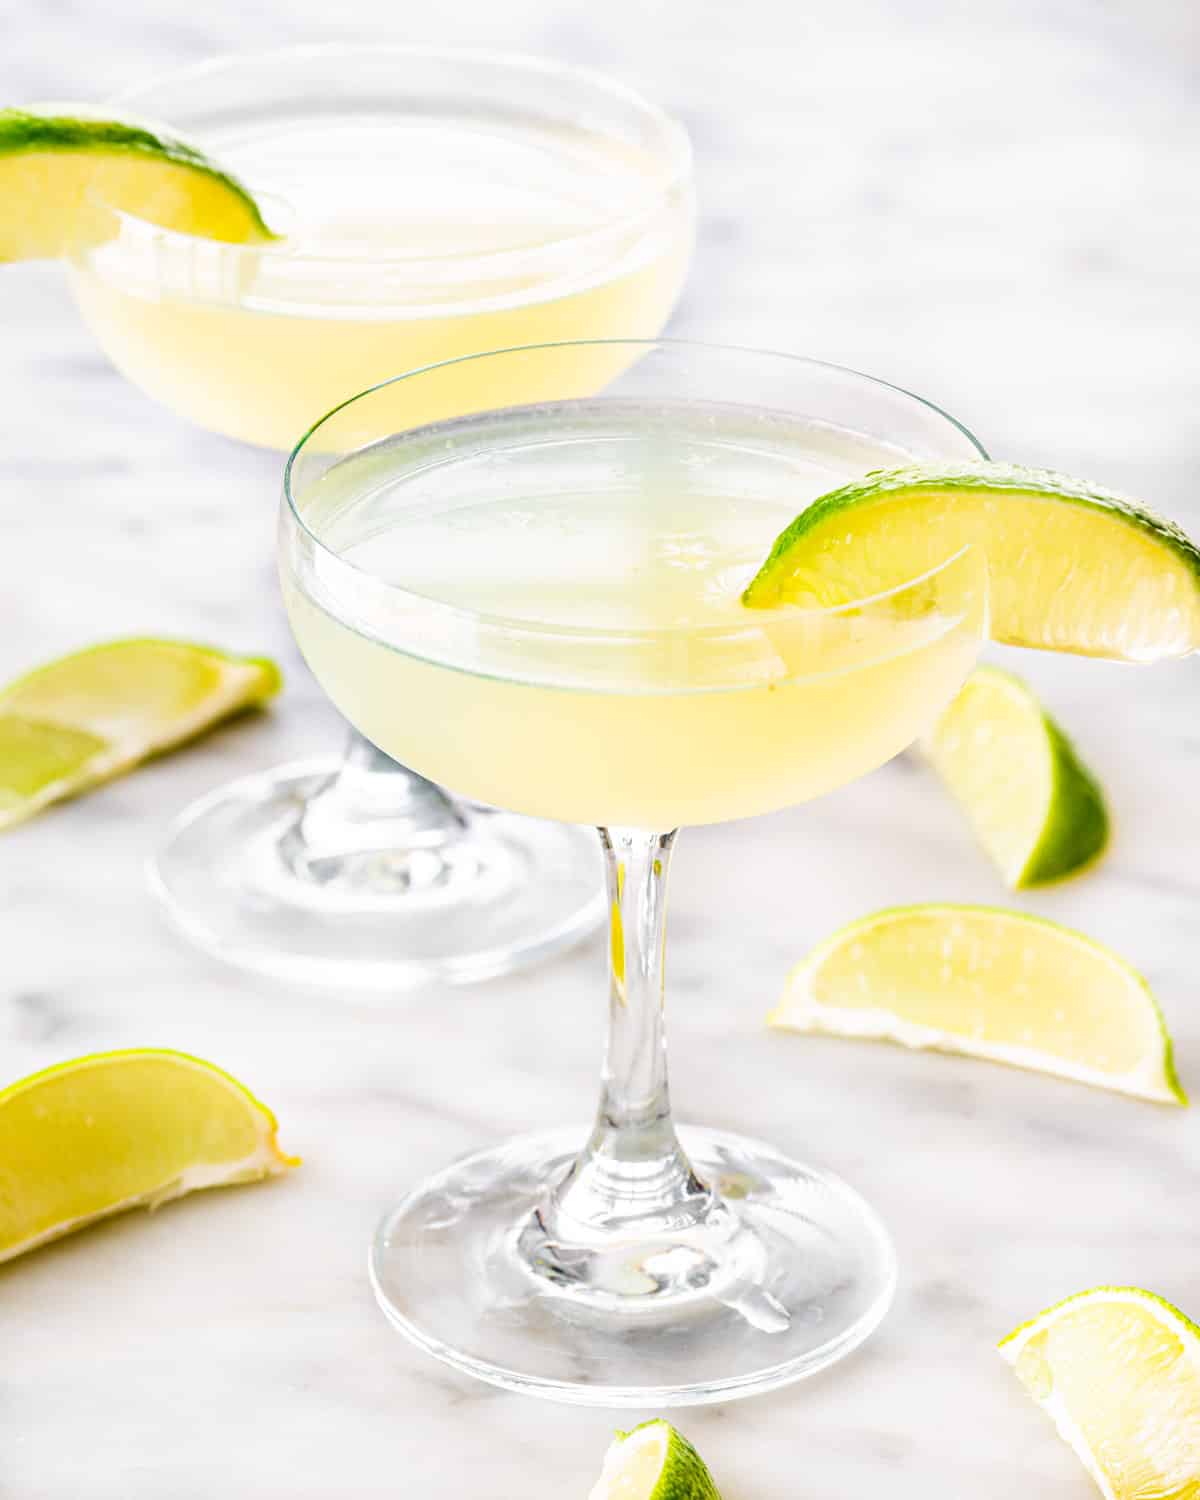 two glasses with daiquiri and garnished with lime wedges.